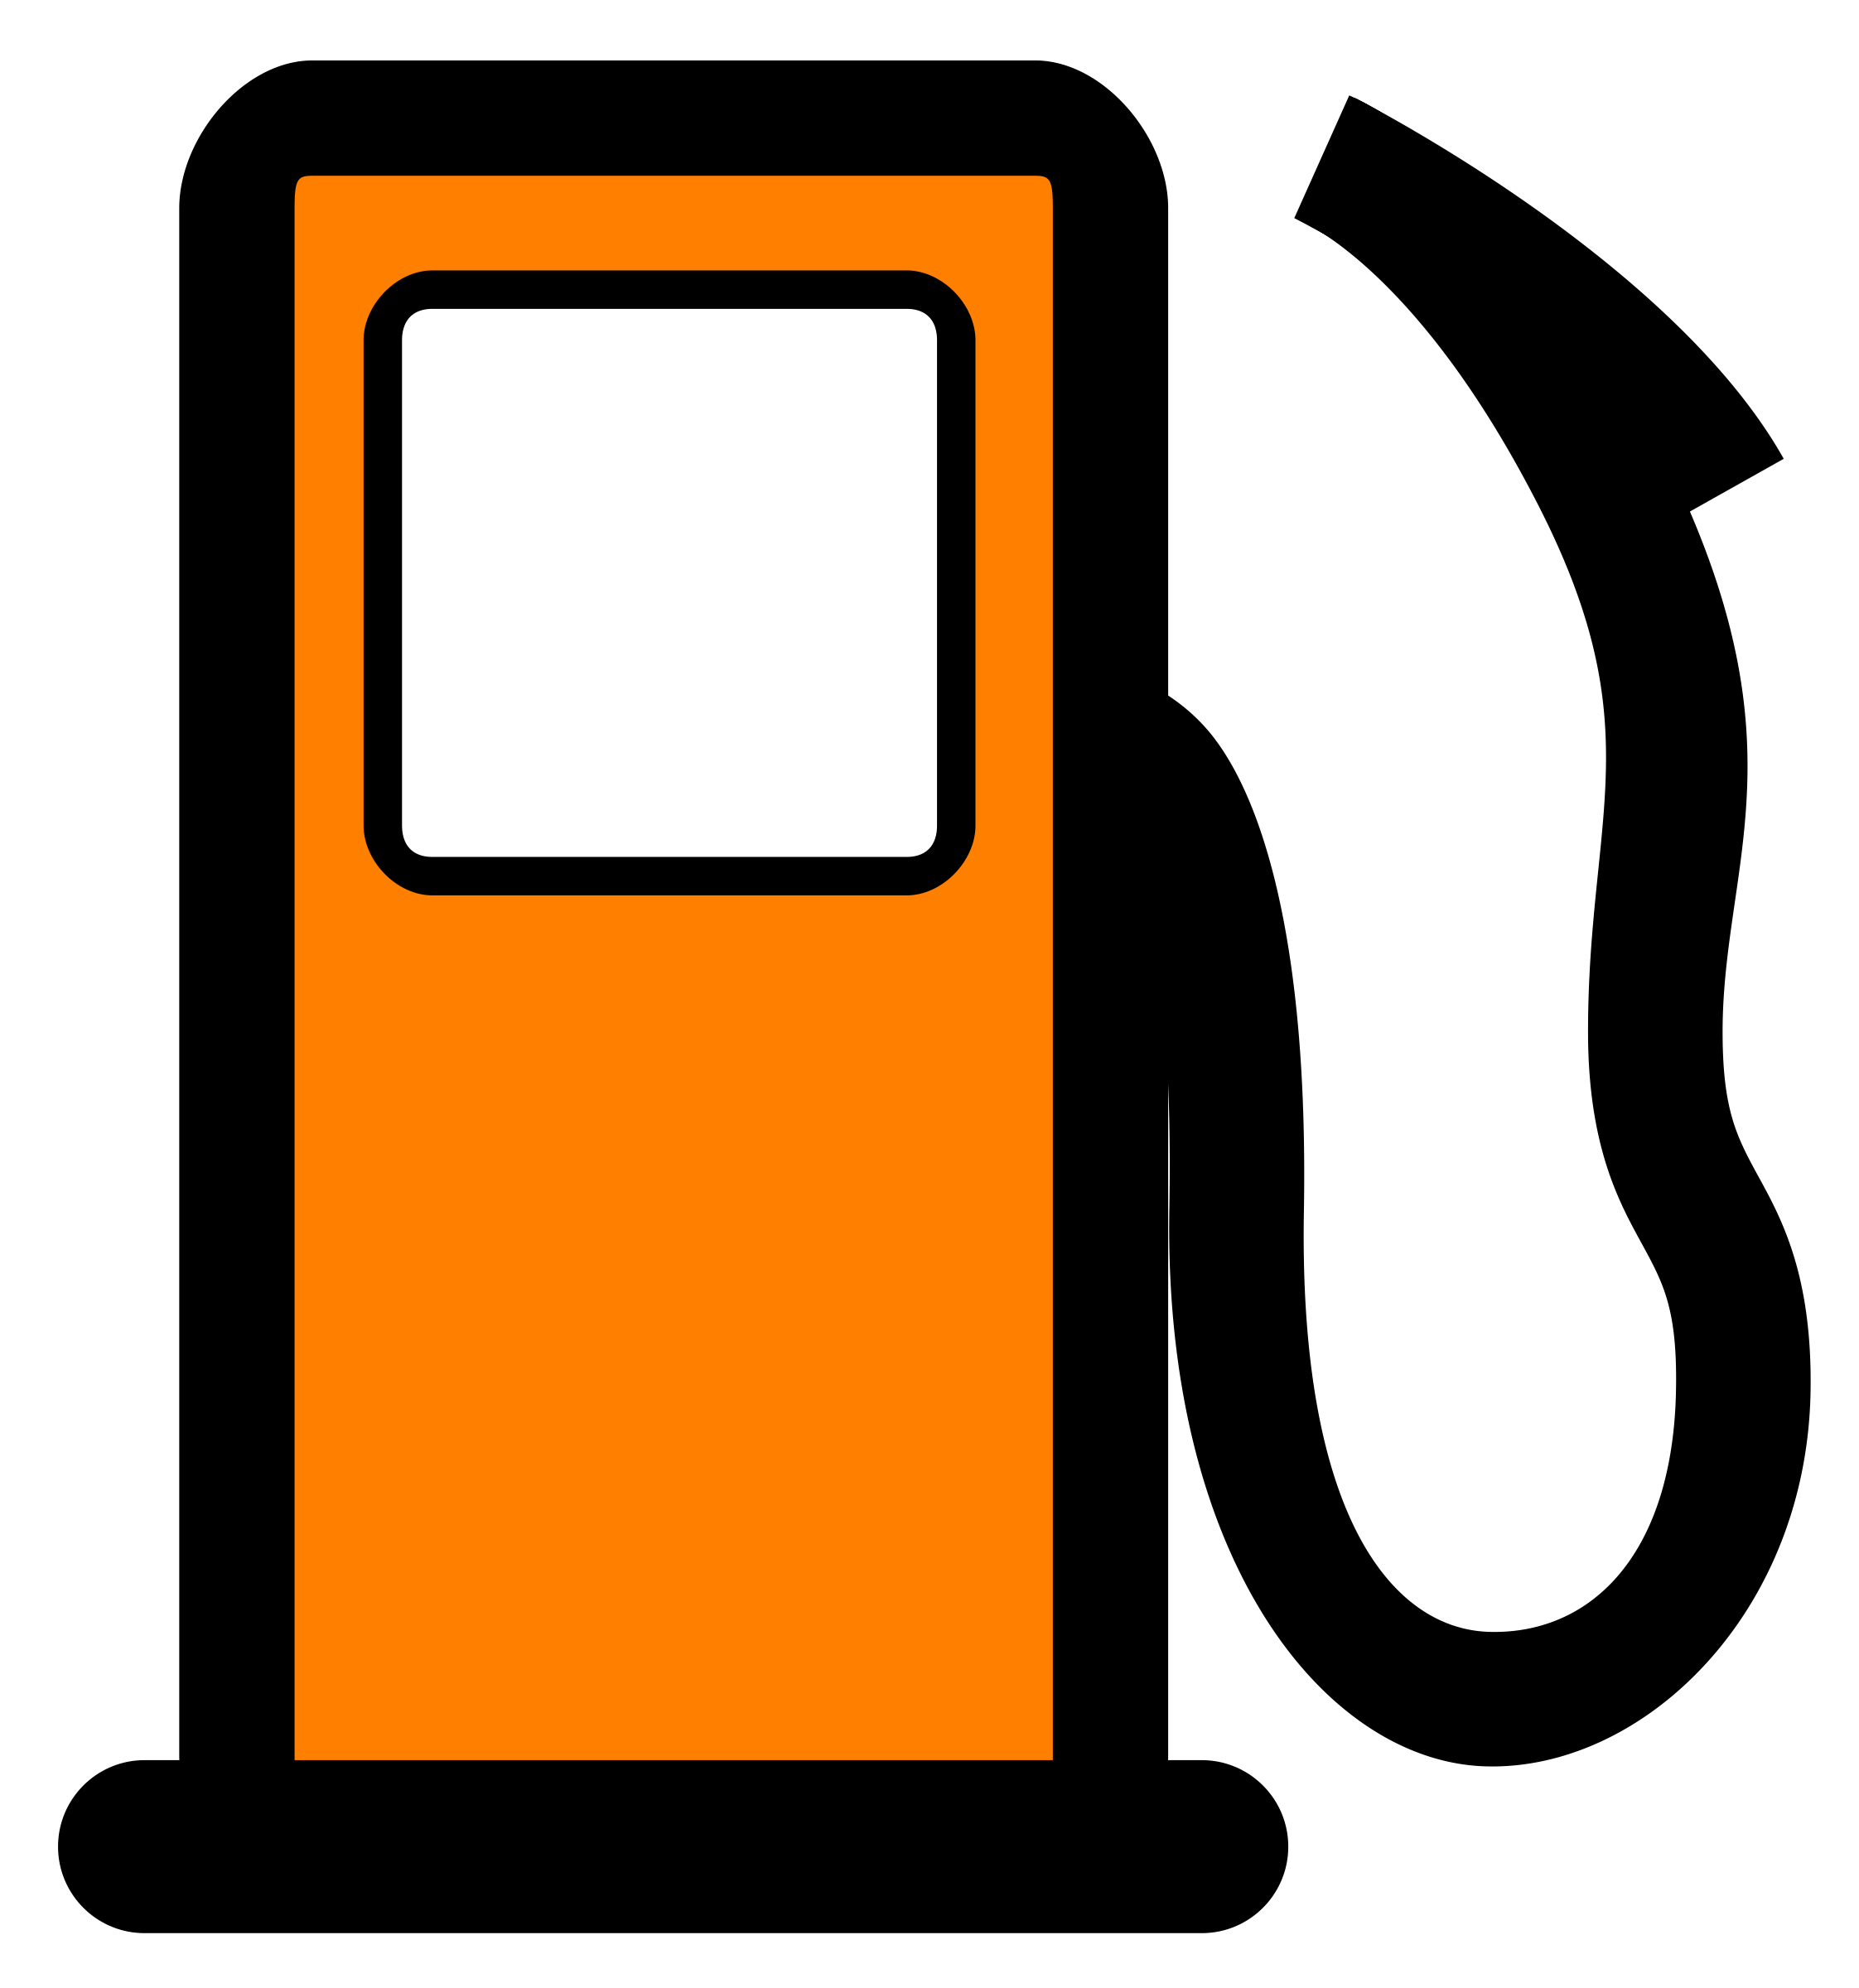 share clipart about Big Image - Petrol Pump Logo Png, Find more high qualit...